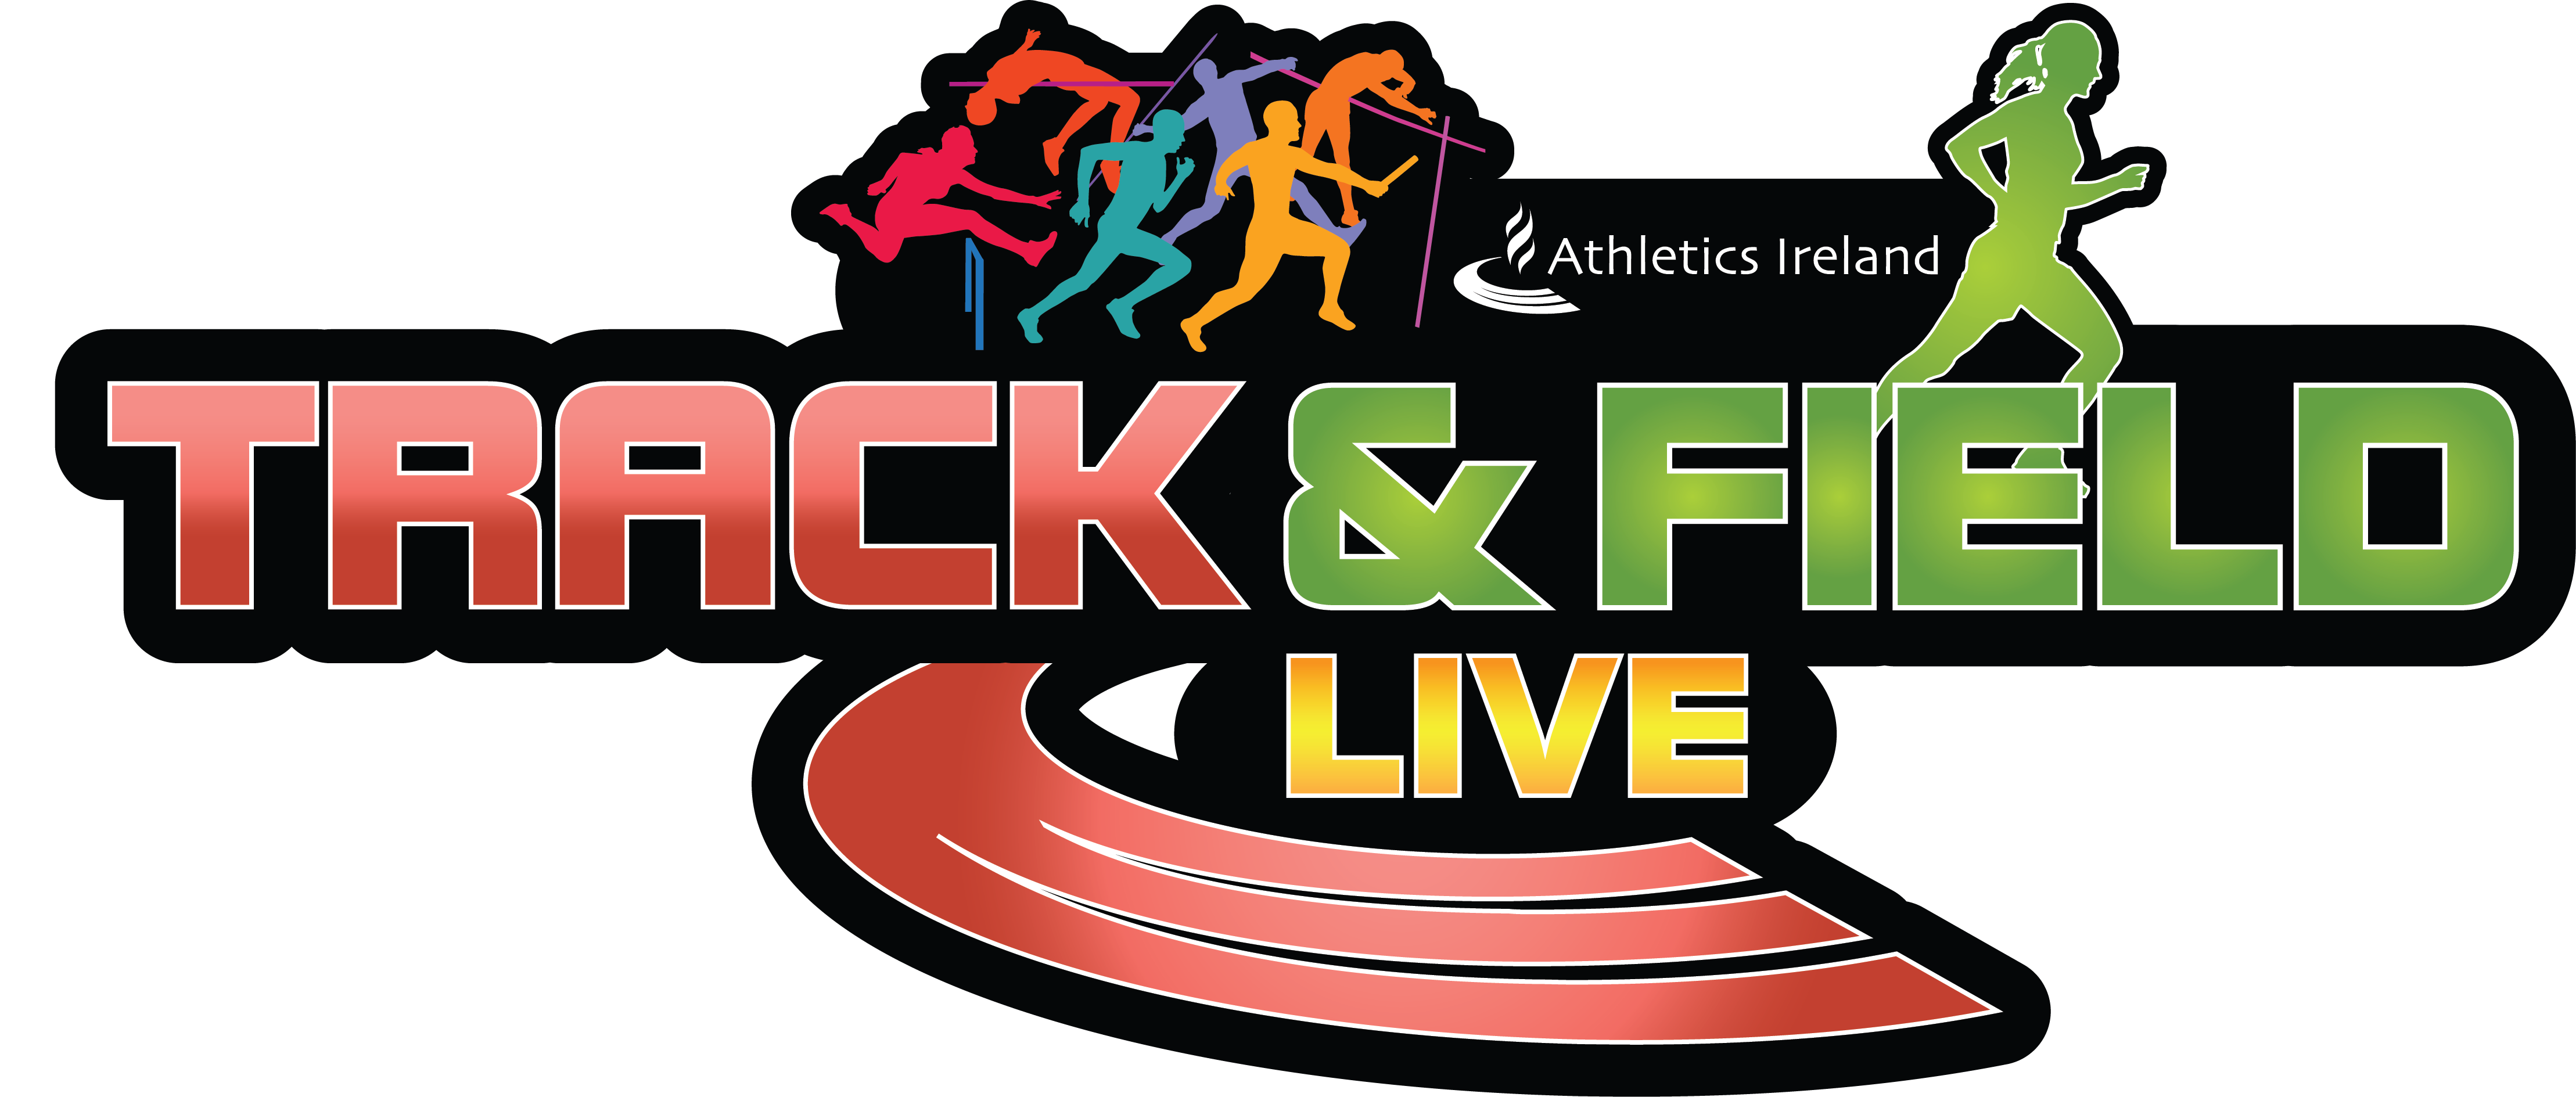 ATHLETICS IRELAND ‘TRACK AND FIELD LIVE’ TOUR